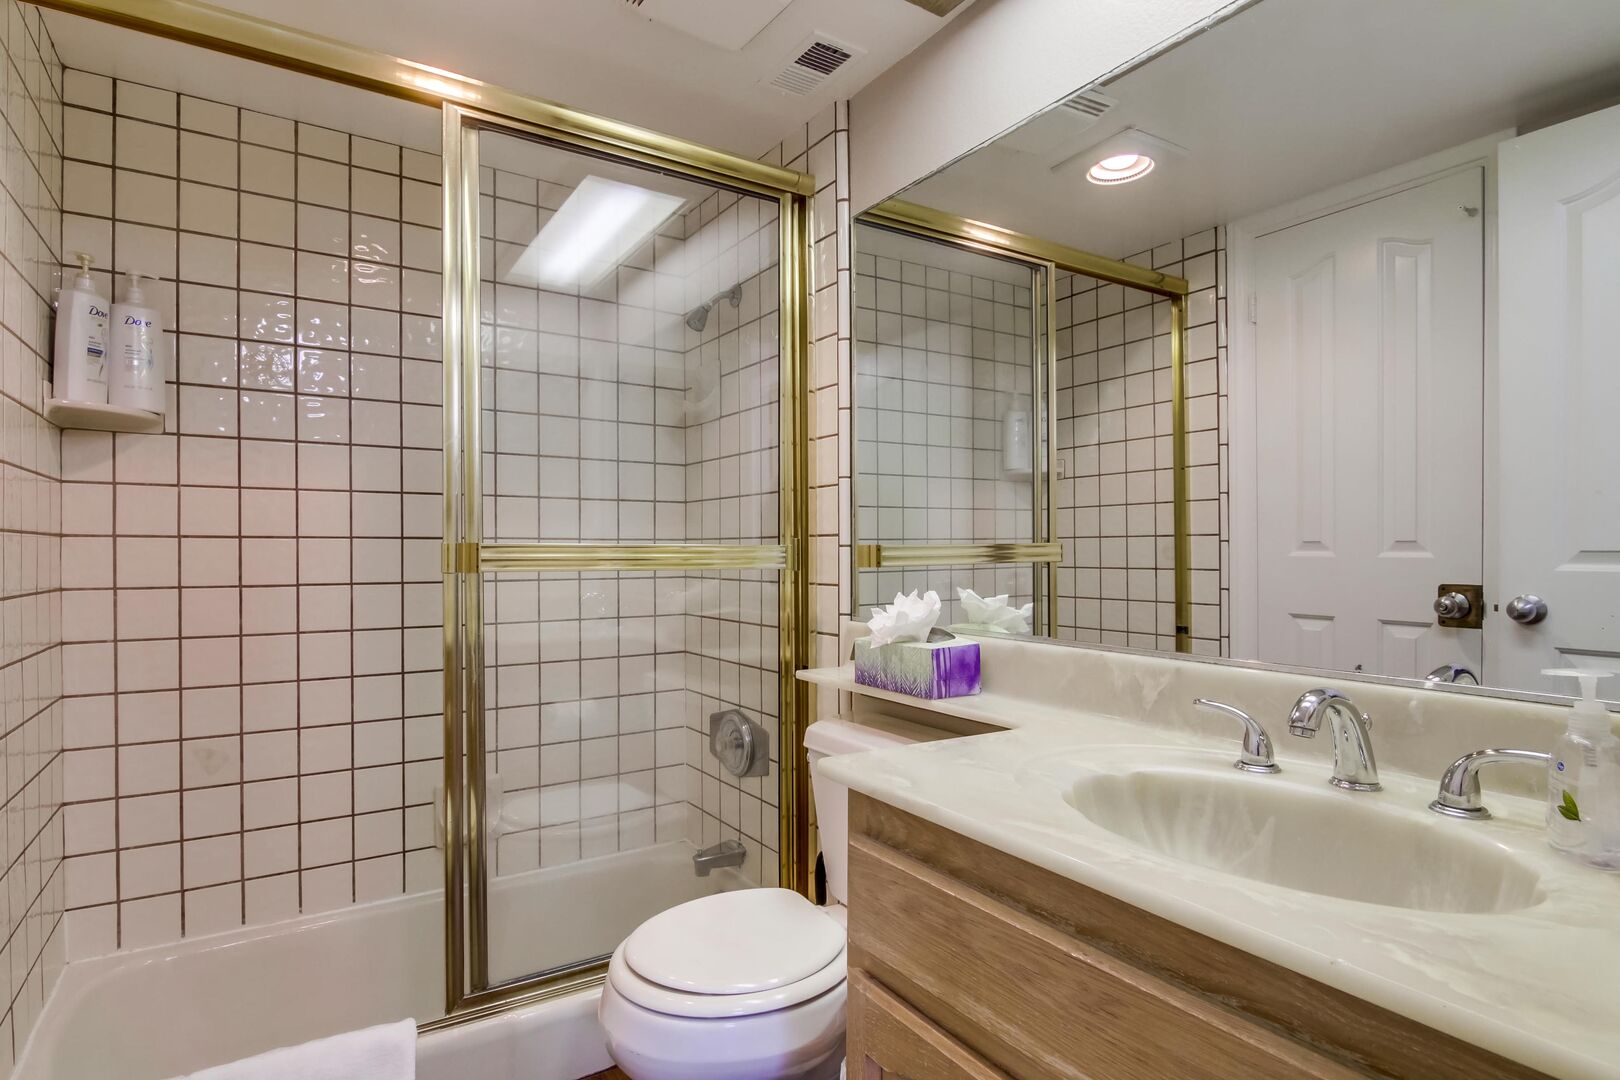 Downstairs bathroom with vanity sink and tub/ shower combination